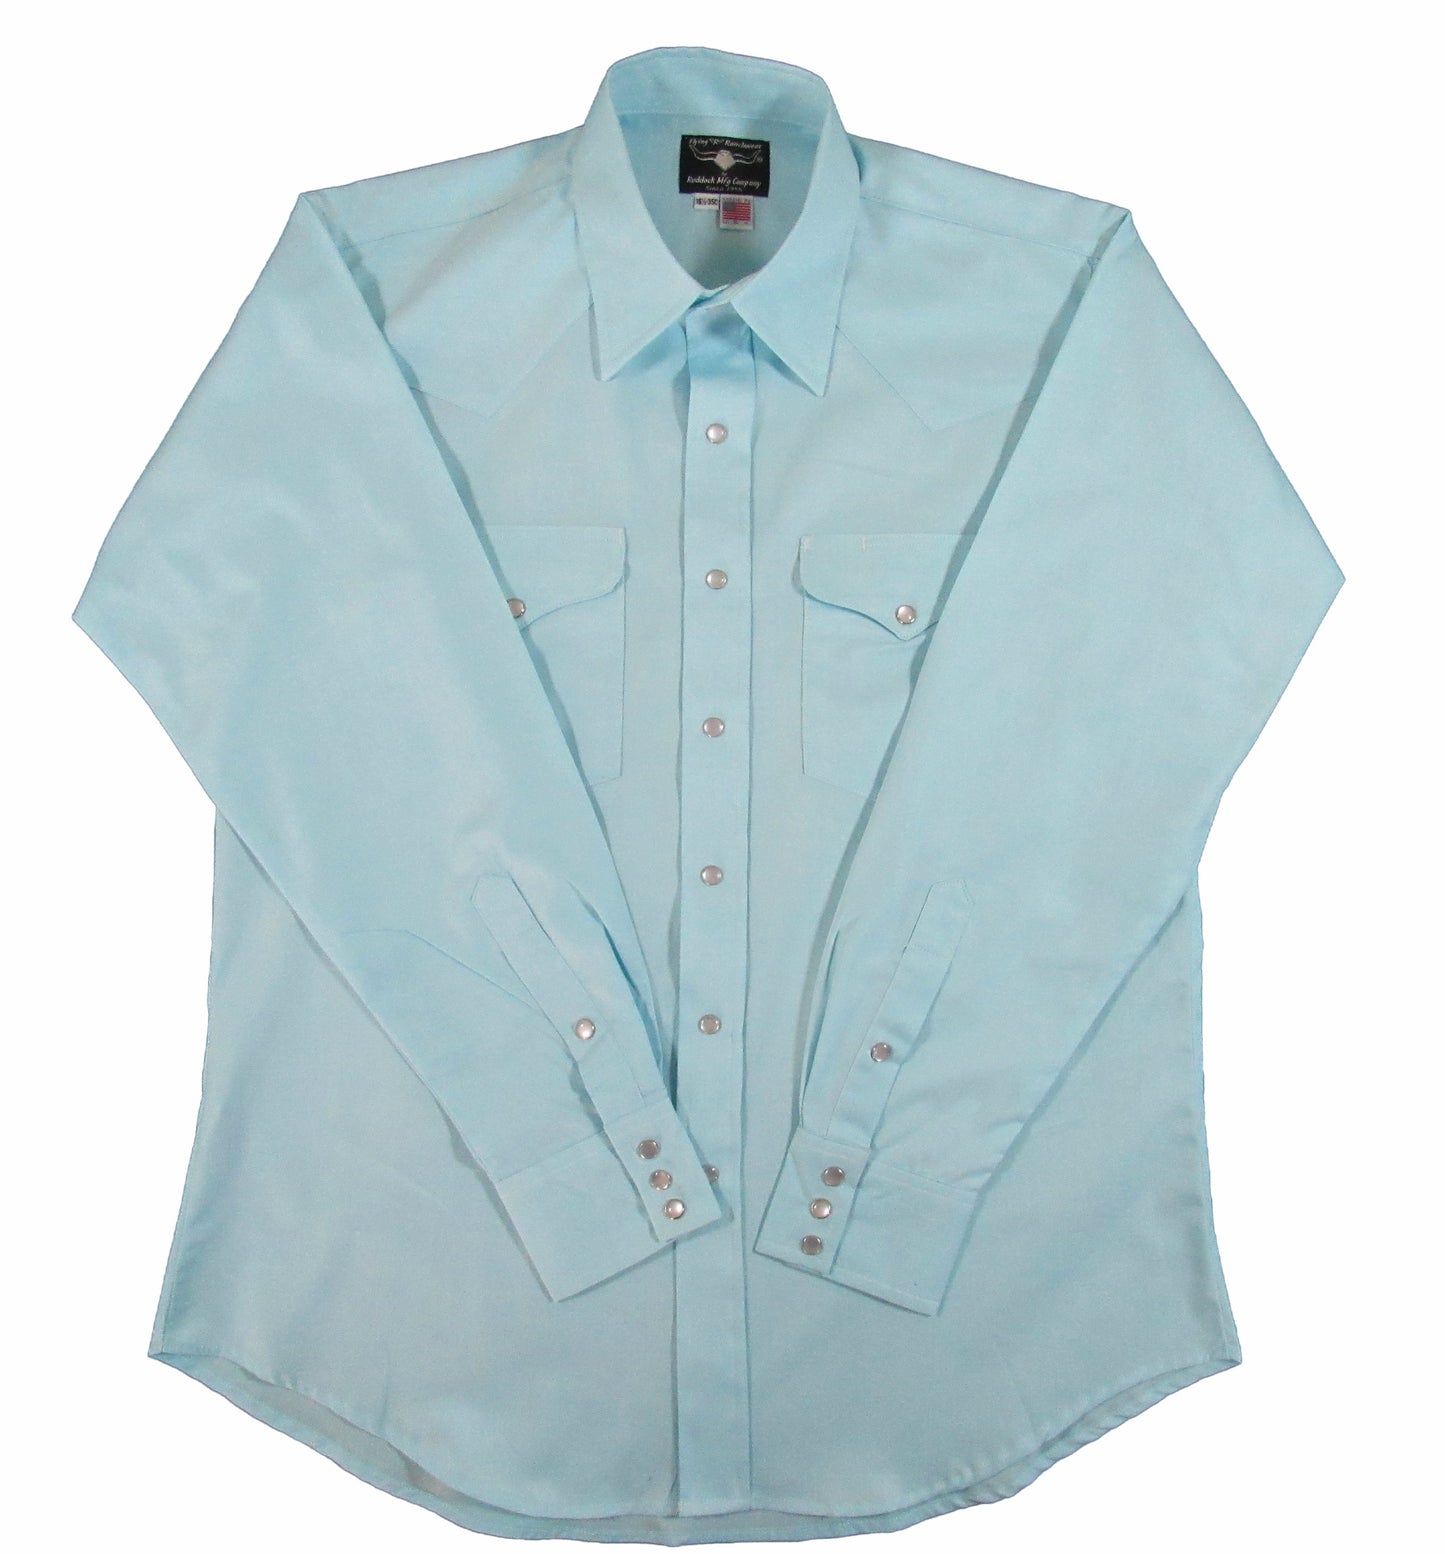 Flying R Ranchwear - Primo Pinpoint Oxford - Mint Green - Long Sleeve